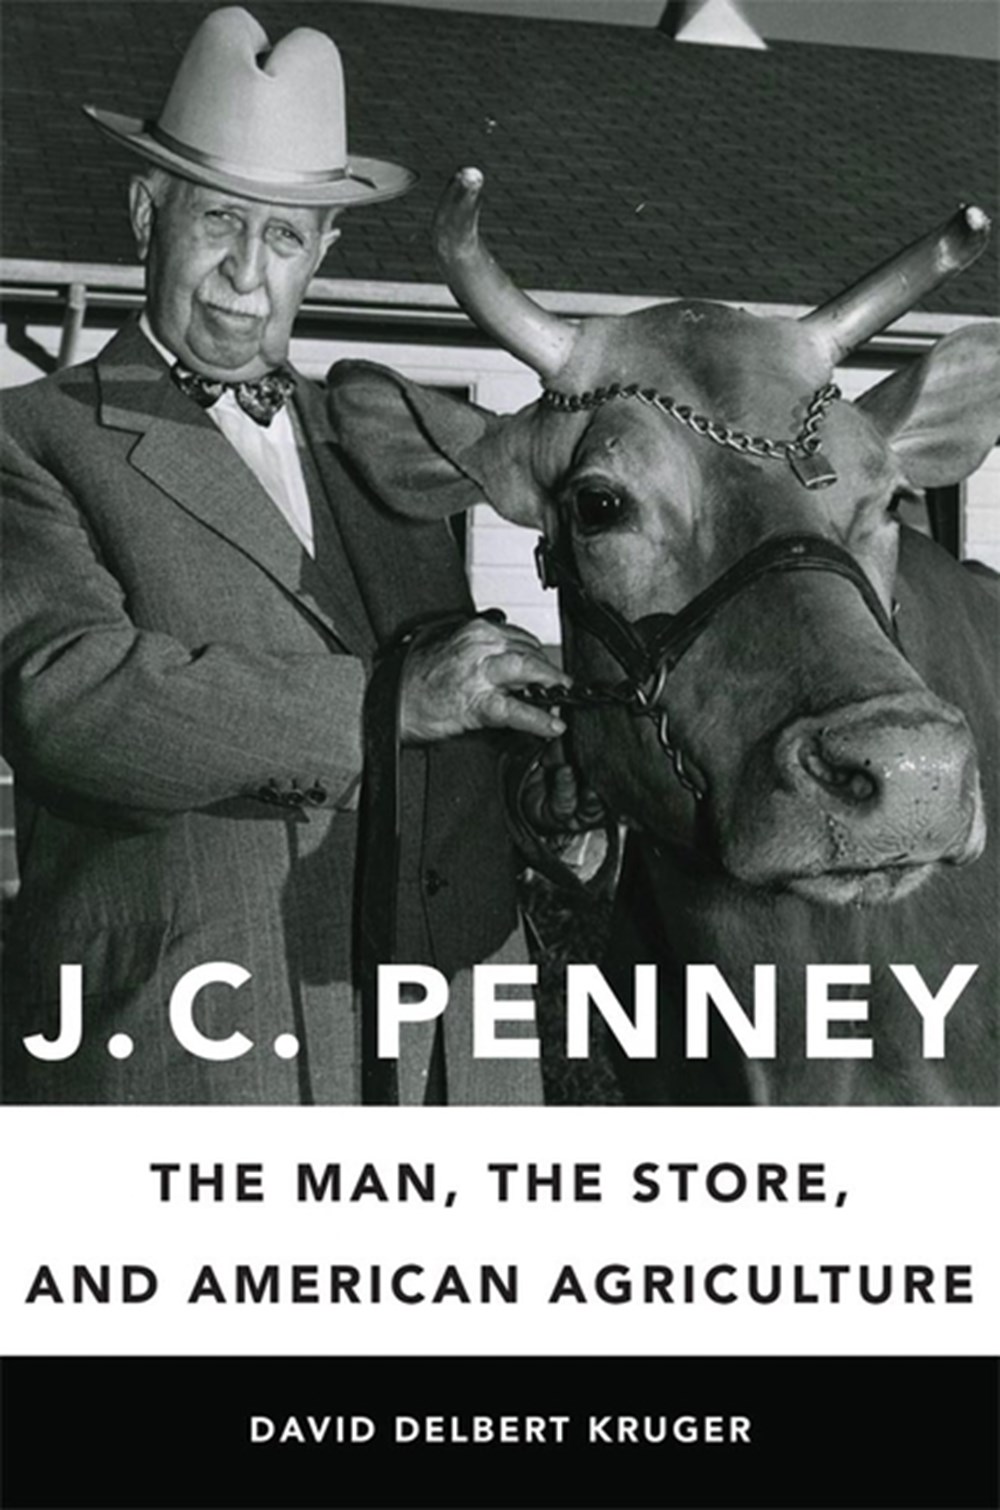 J. C. Penney The Man, the Store, and American Agriculture